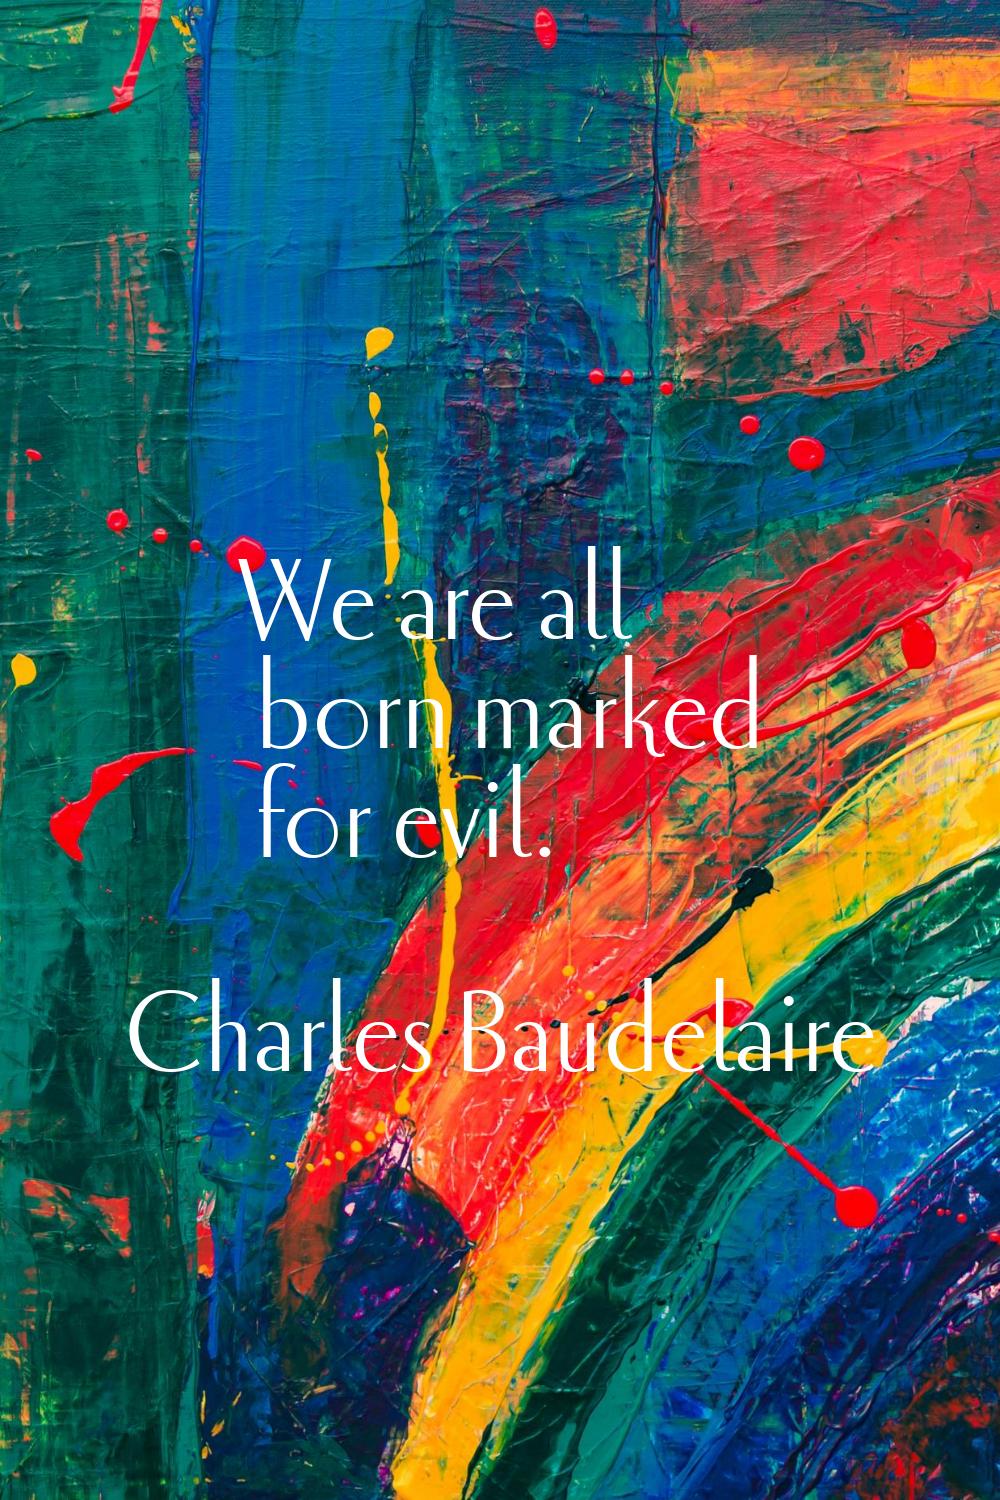 We are all born marked for evil.